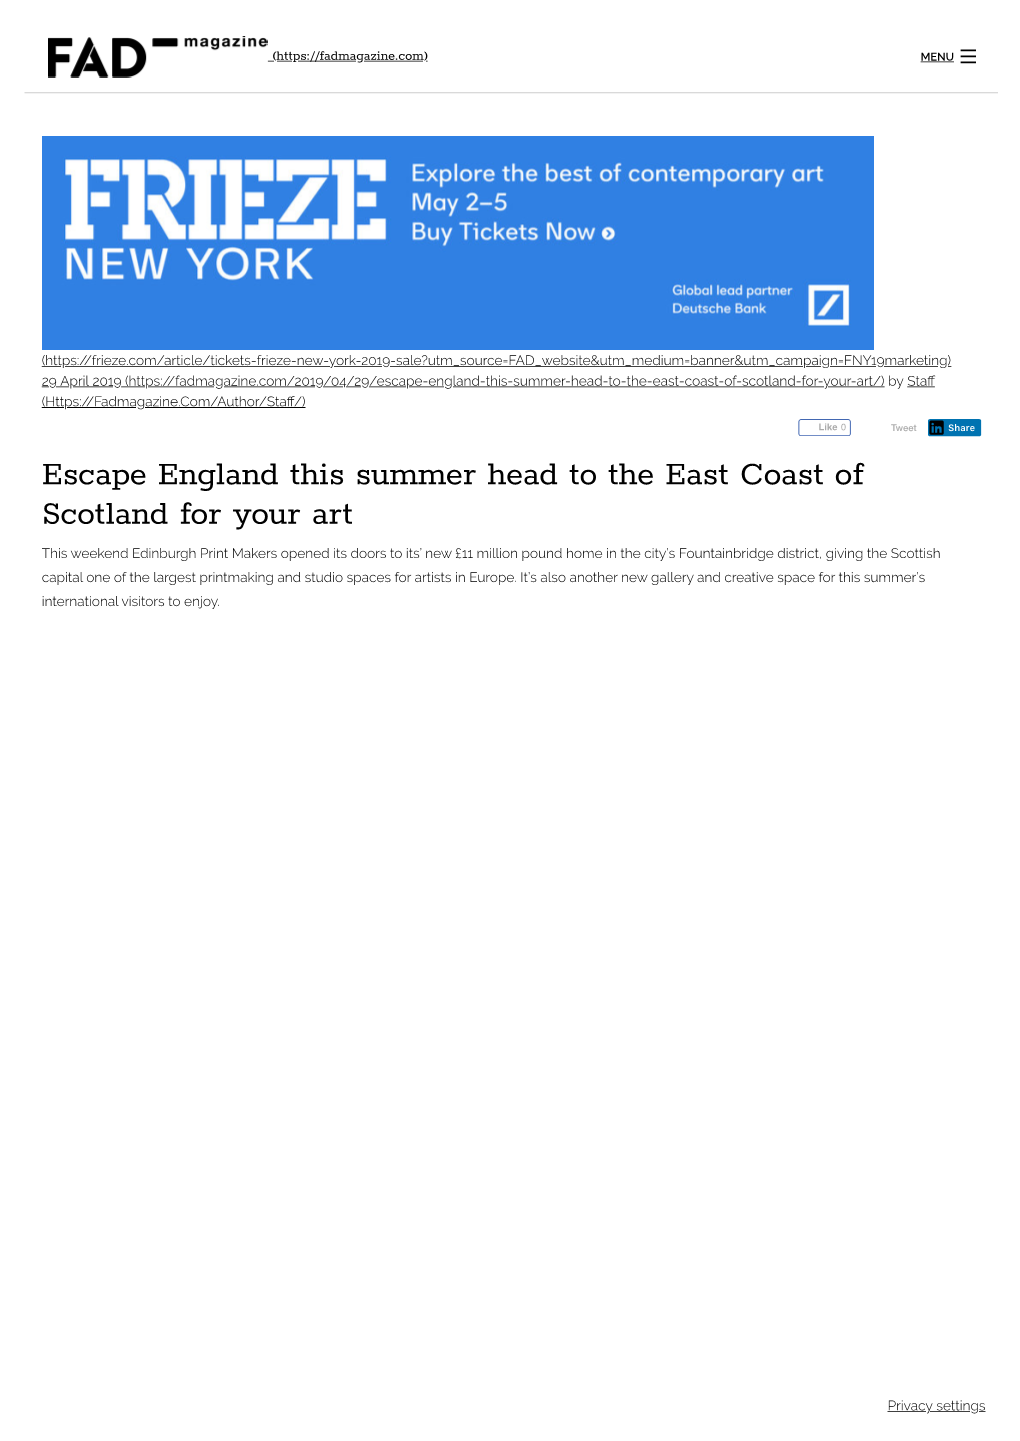 Escape England This Summer – Head to Scotland For